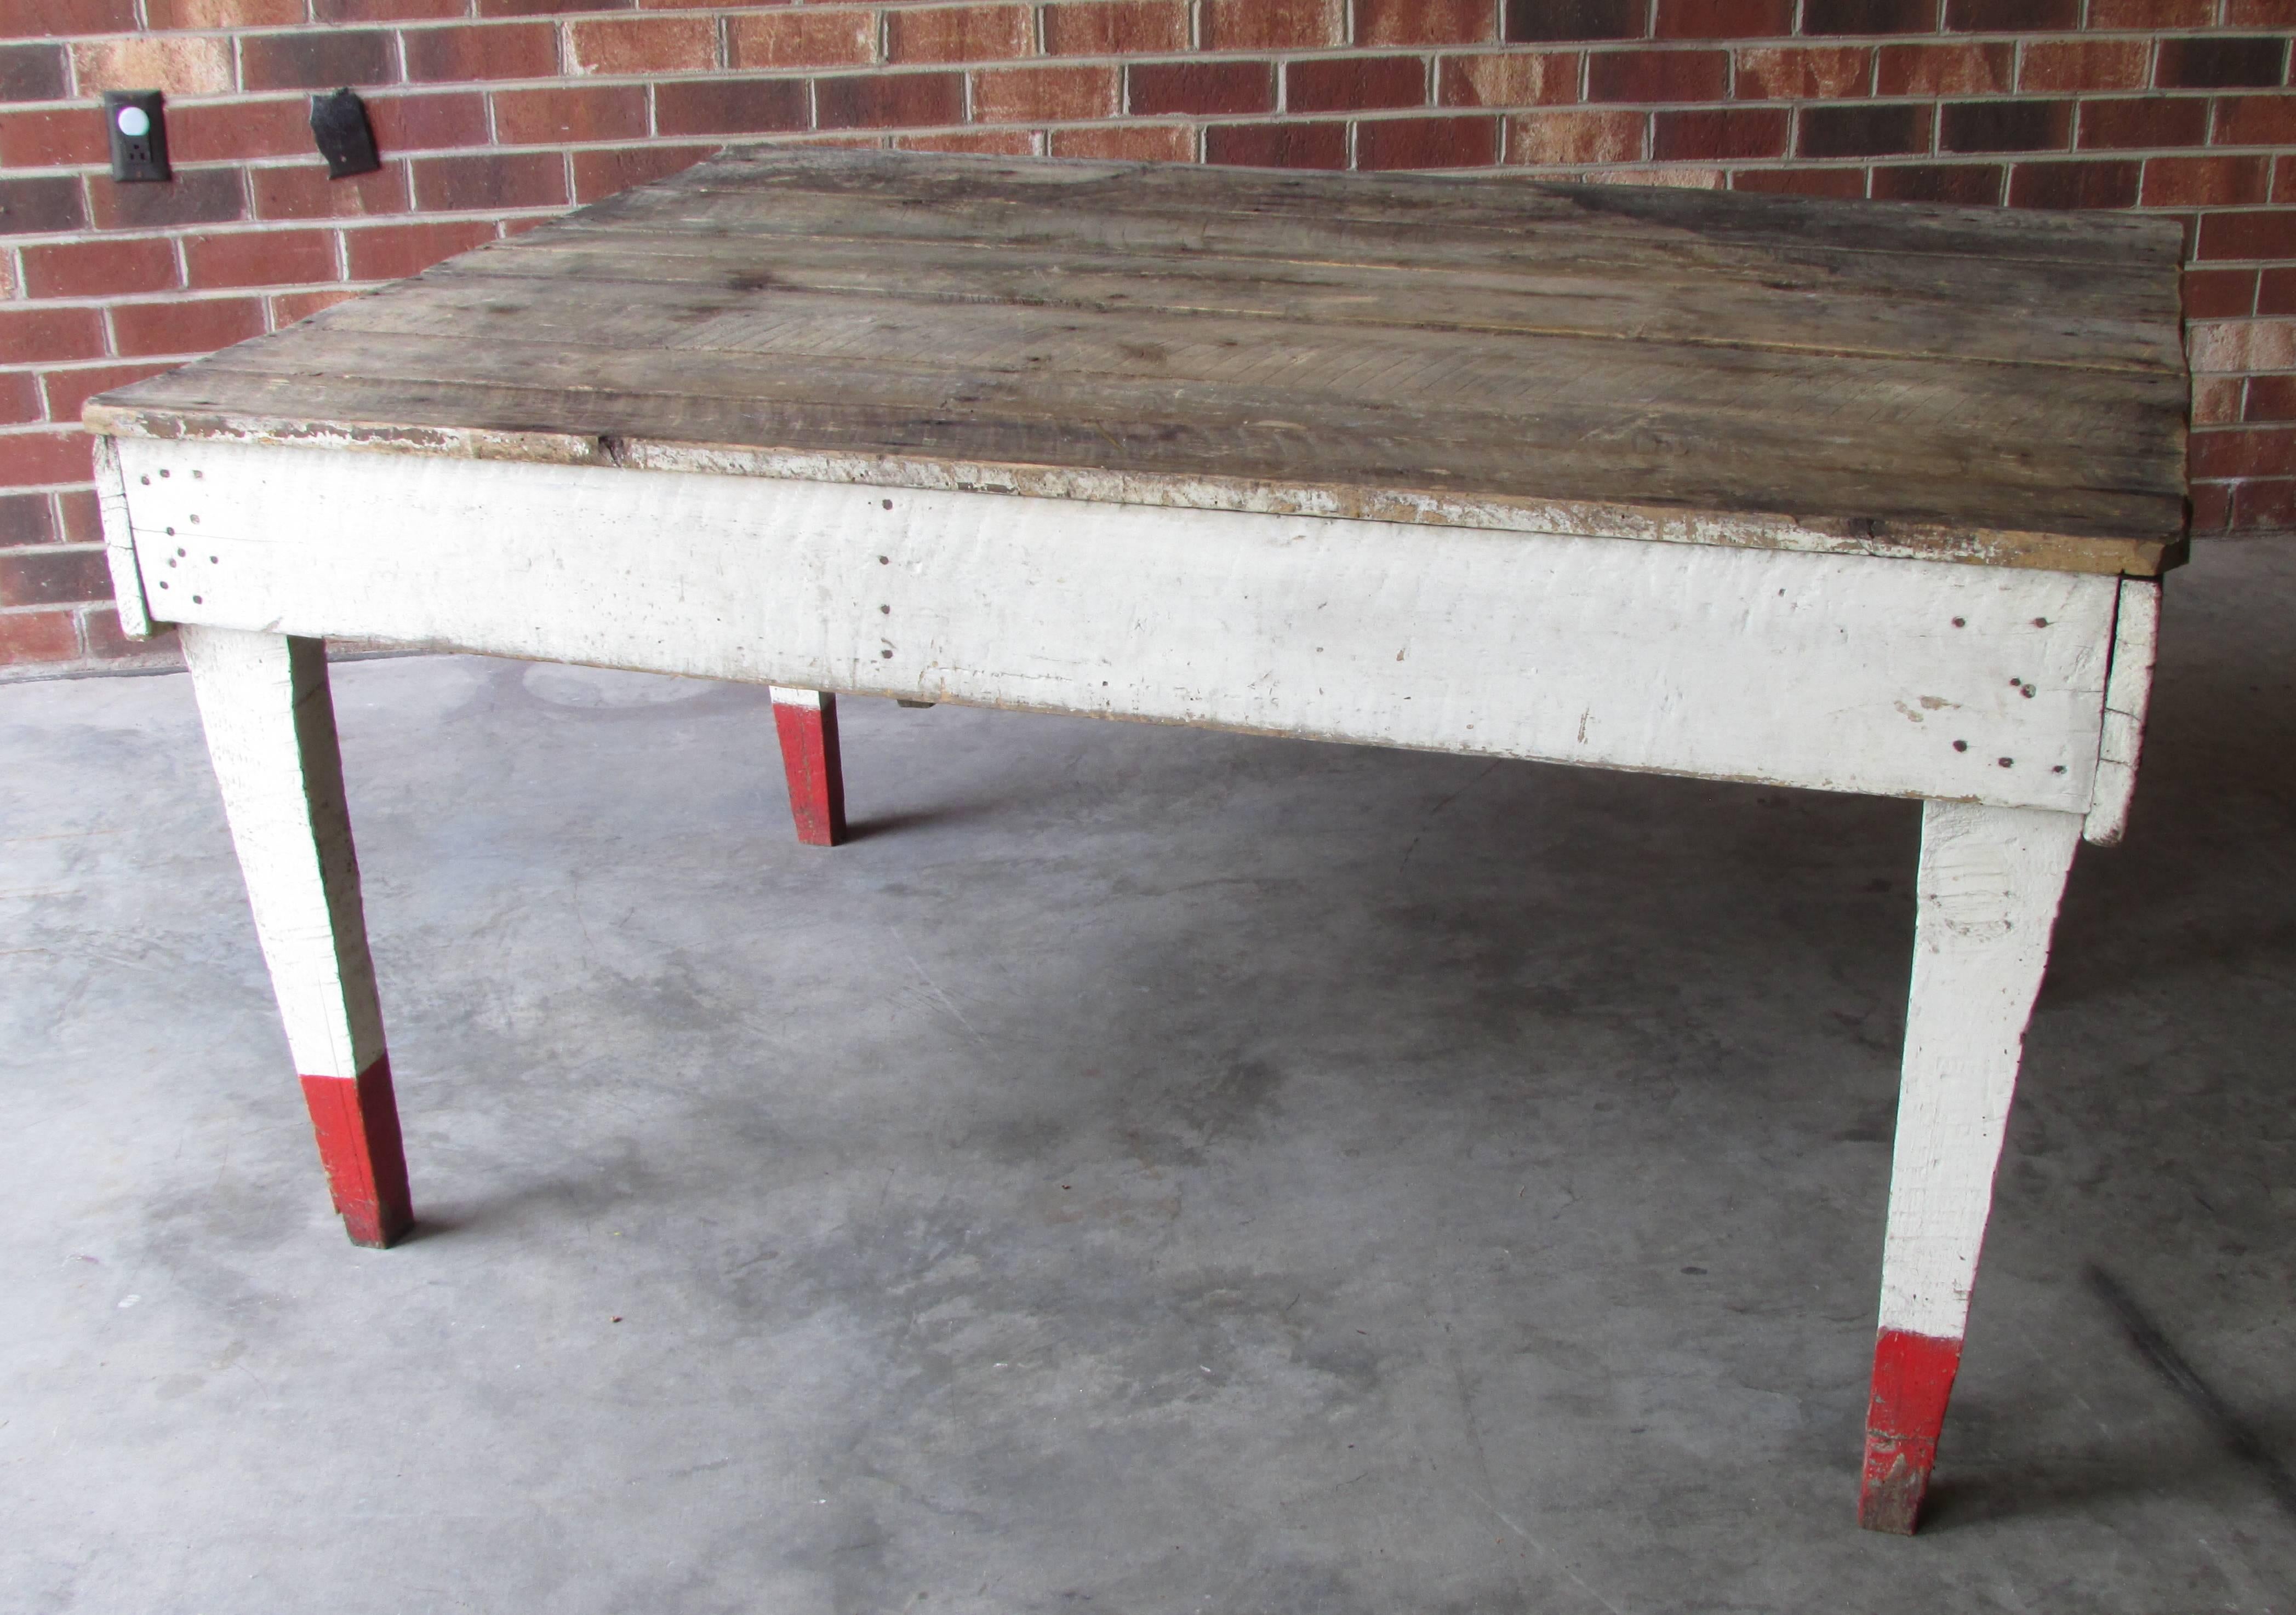 Rustic country farm table with rough sawn top and white painted sides and legs with red tips from Appalachian Mountains.